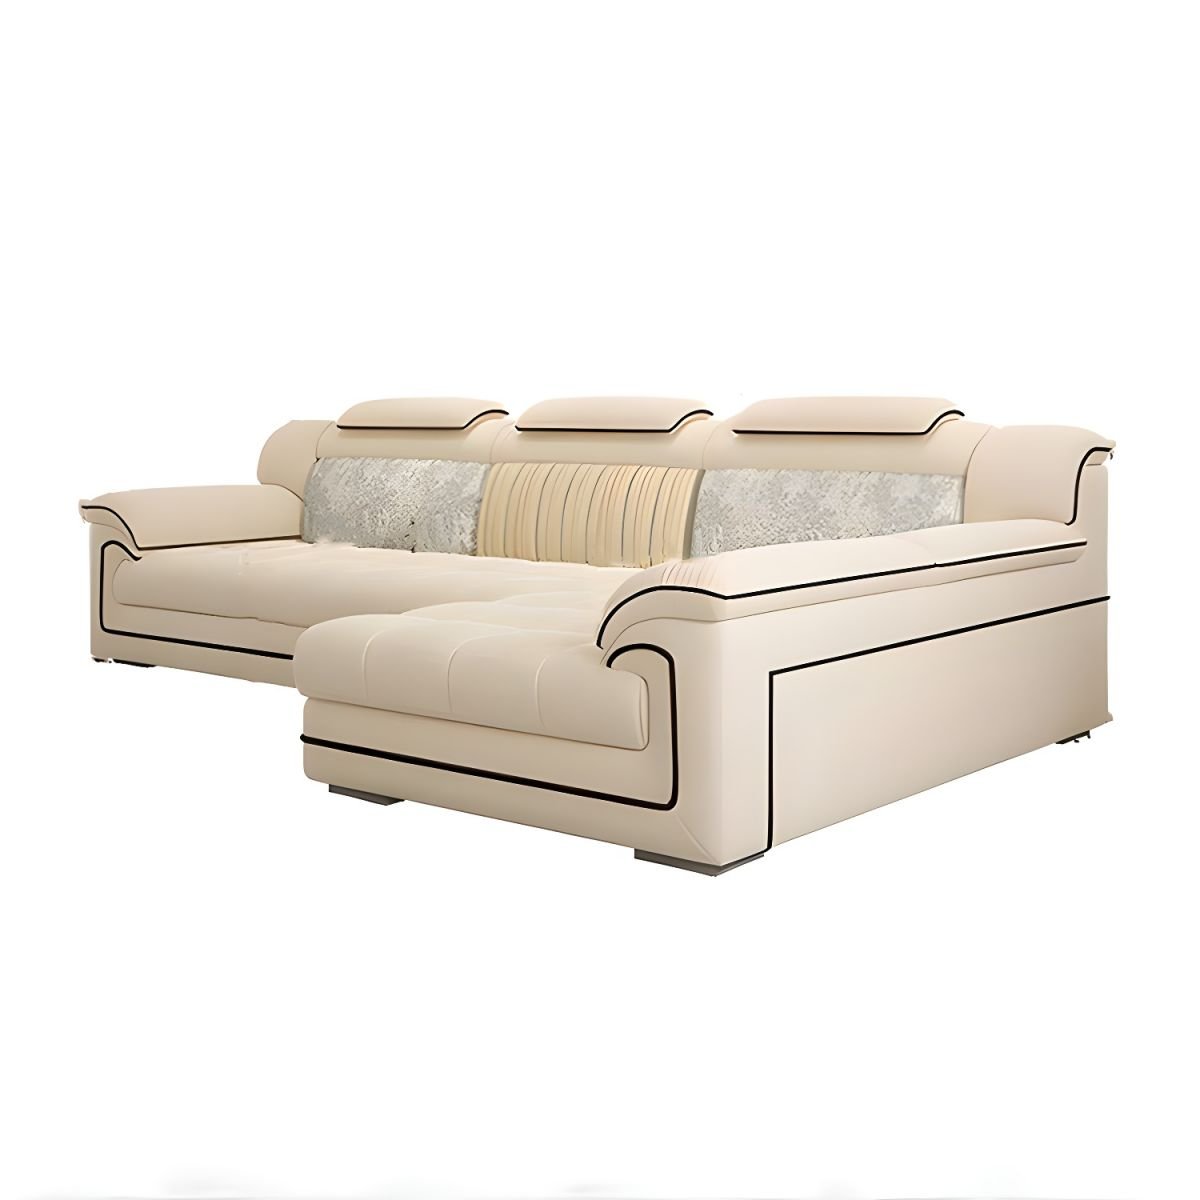 Contemporary L-Shaped Sofa & Chaise in Off-White with Pillow Top Arm - 111"L x 69"W x 41"H Flannel